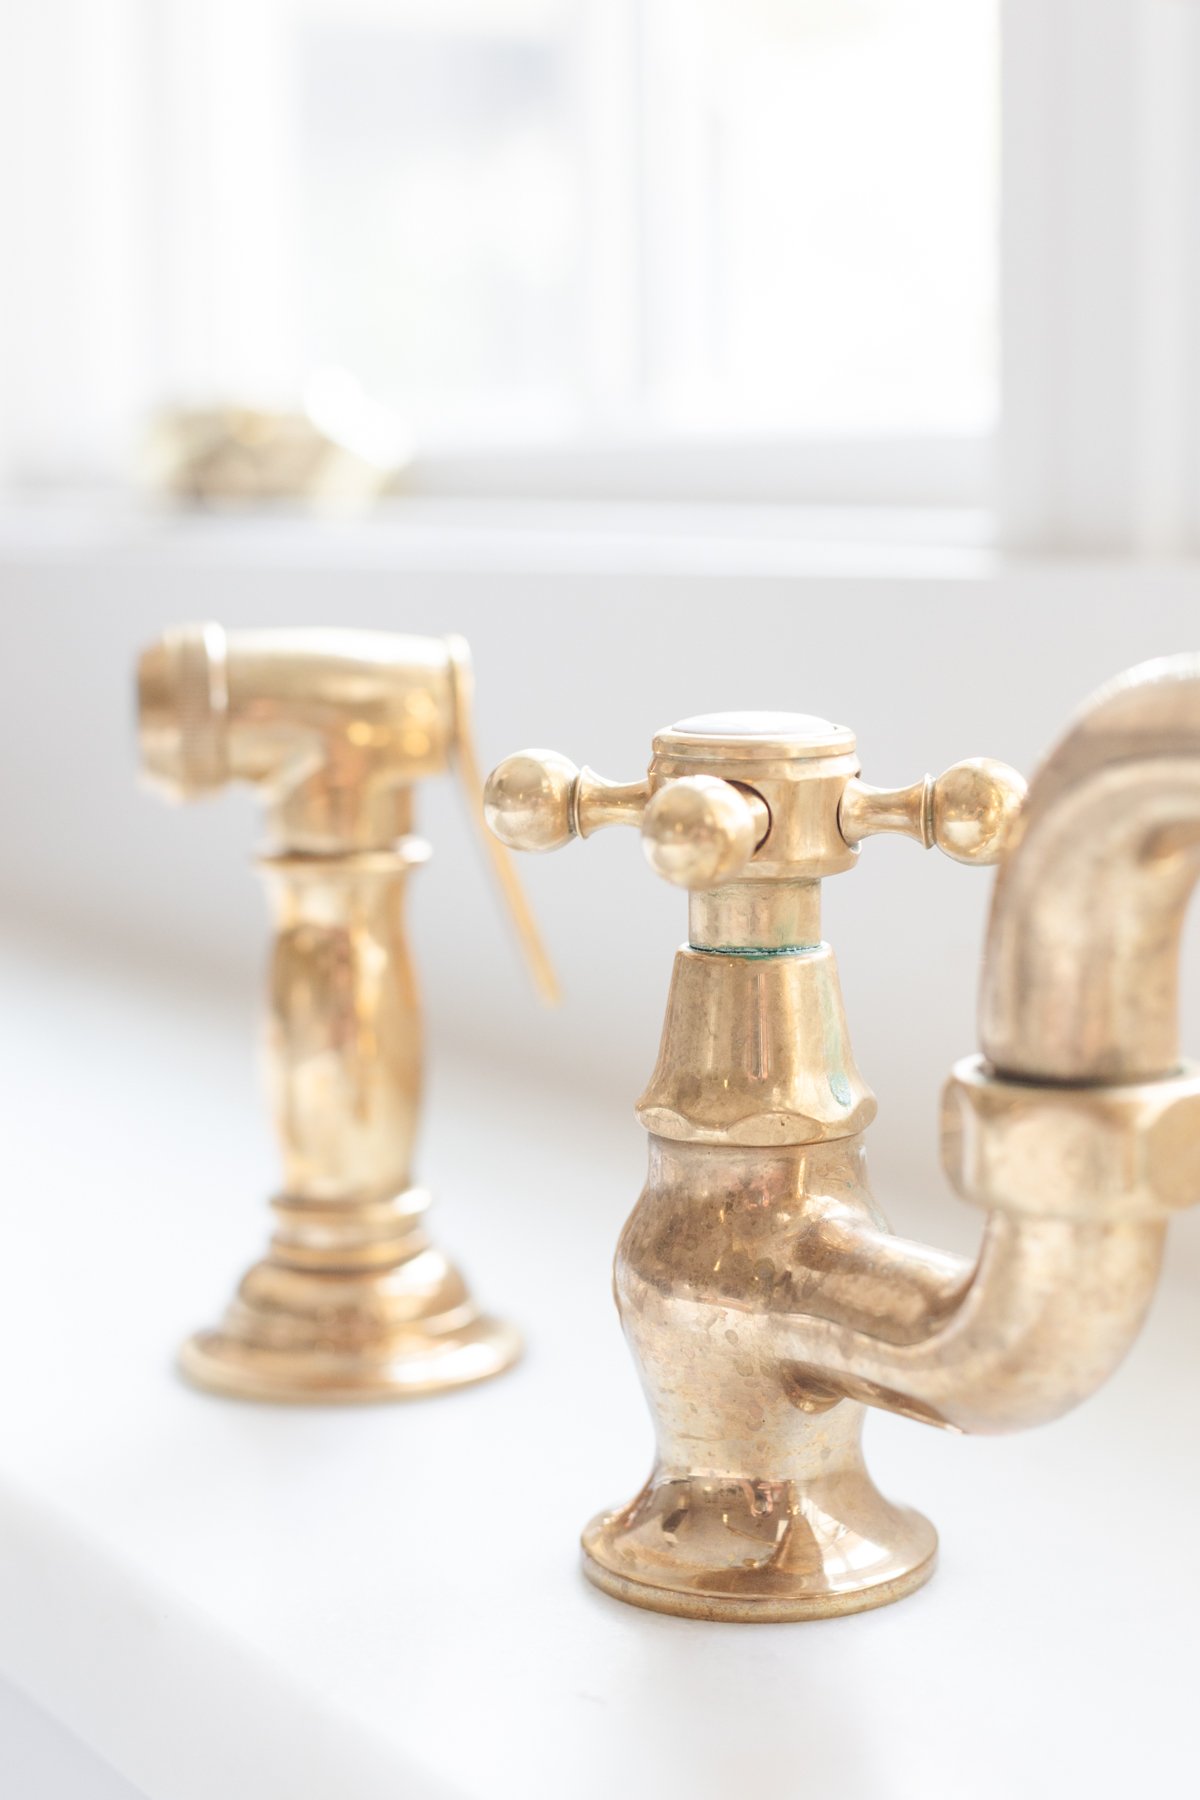 A white farmhouse sink with an unlacquered brass faucet.